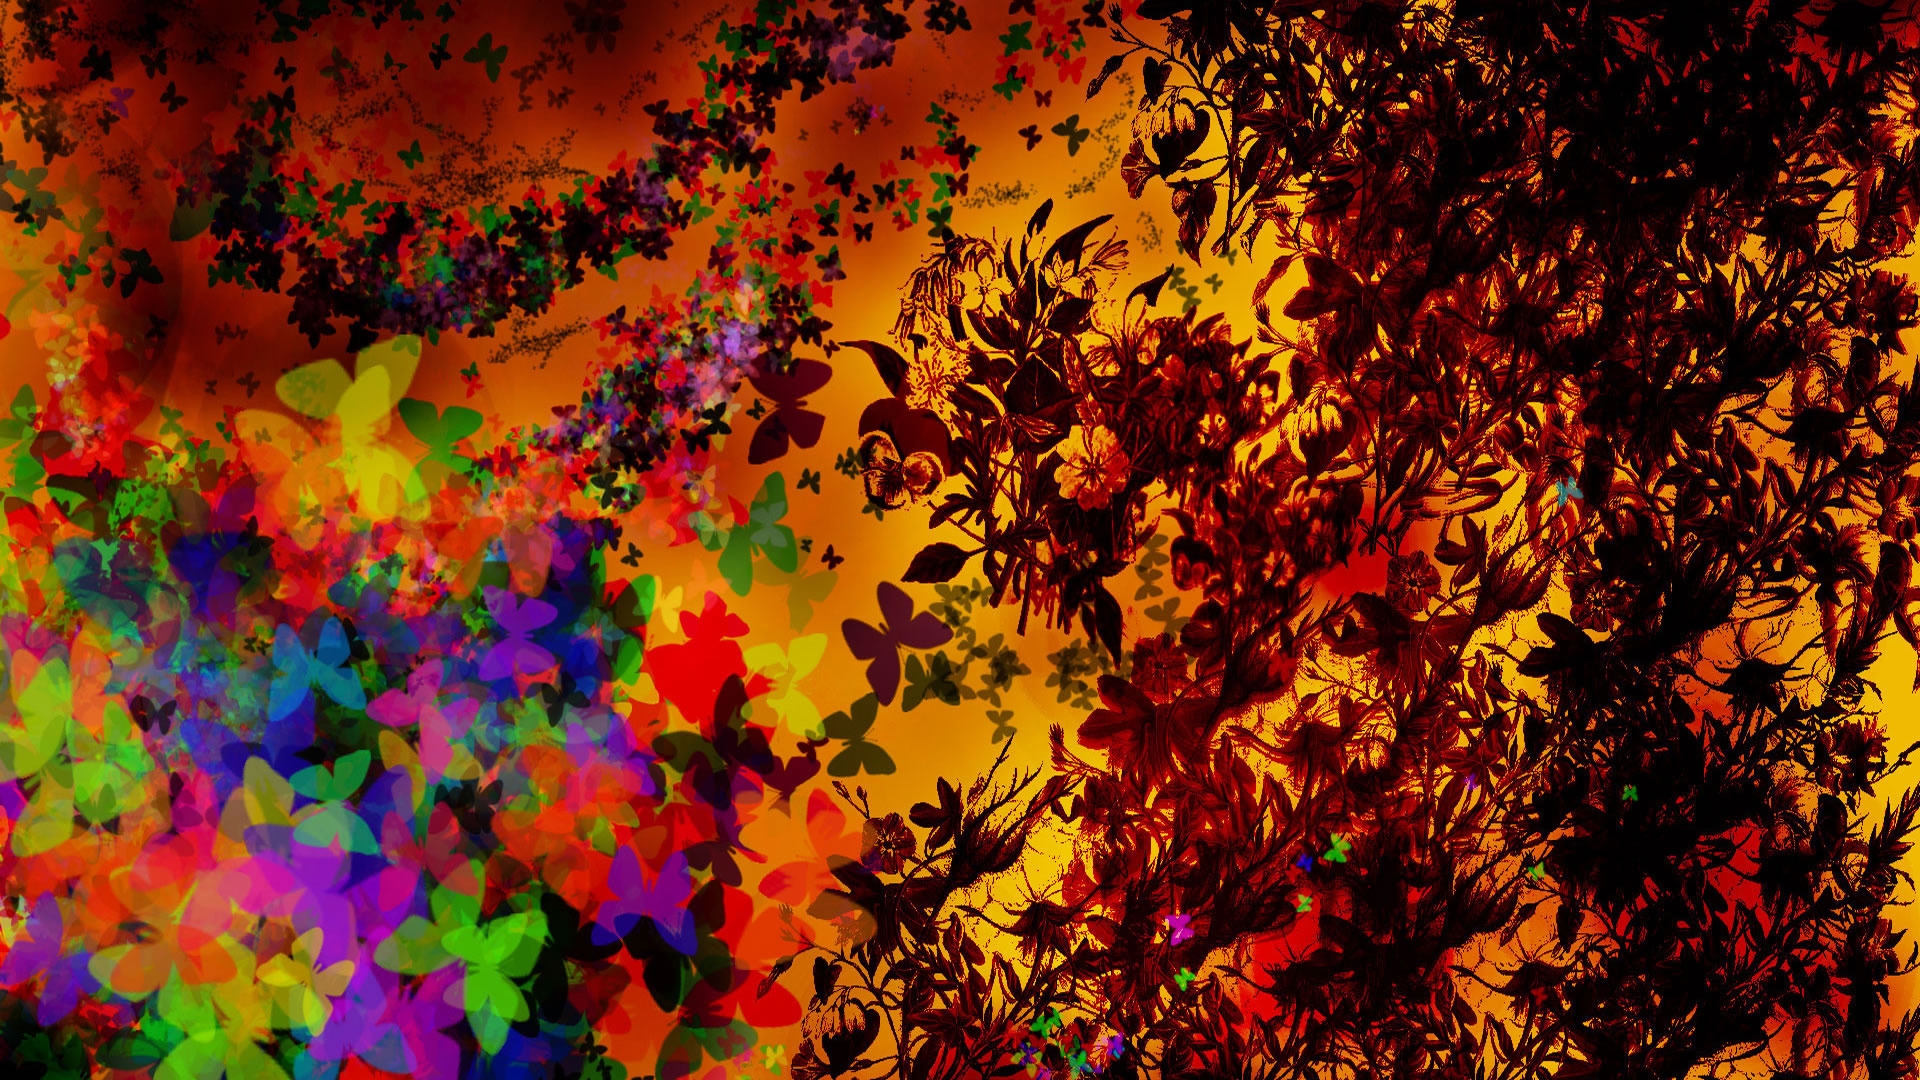 Colourful Fractal for 1920 x 1080 HDTV 1080p resolution